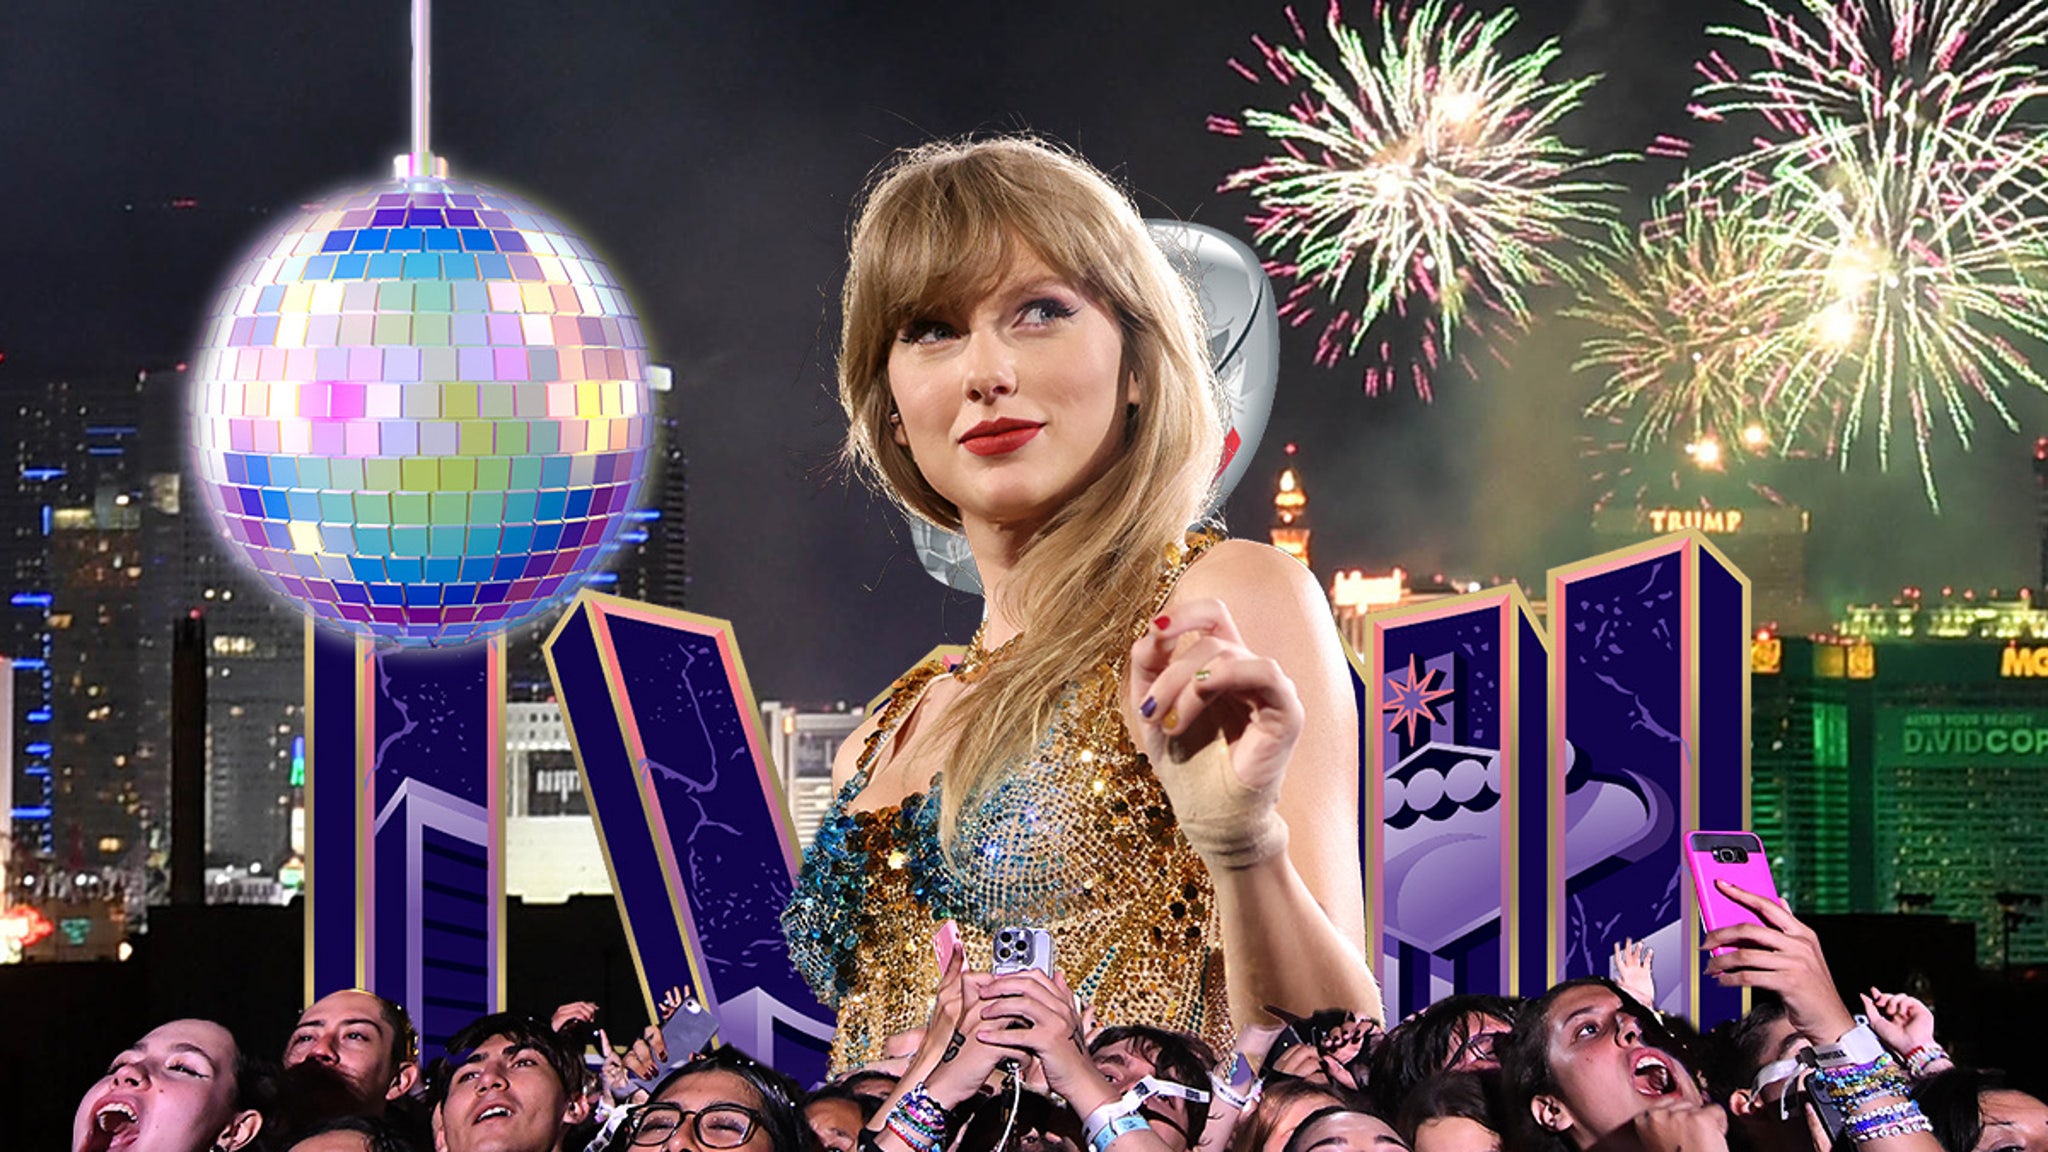 The Taylor Swift Effect Continues with Swiftie-Themed Super Bowl Party